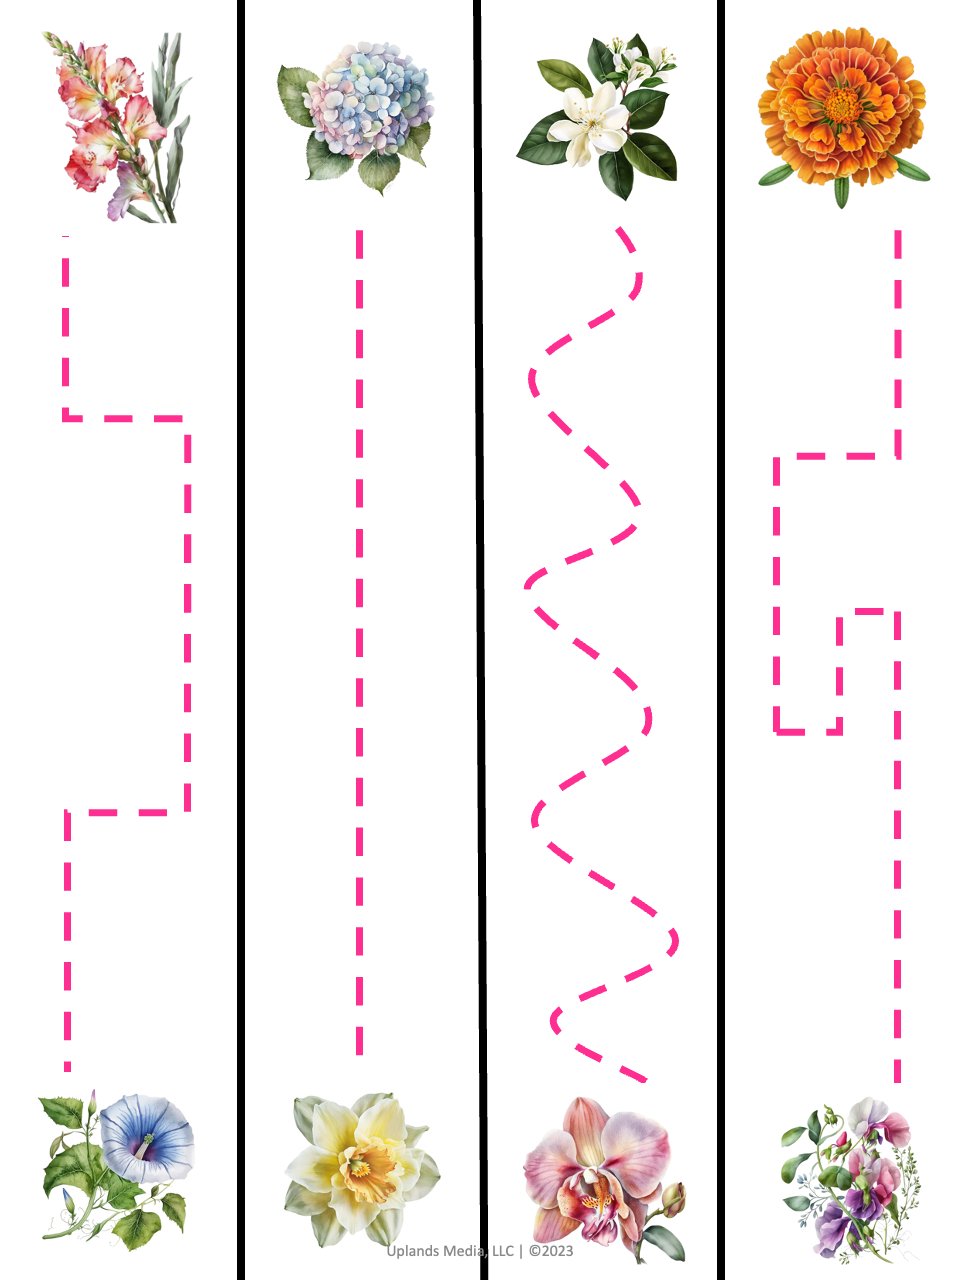 [Activities Pack] Flower Theme - Printables by Carrots Are Orange